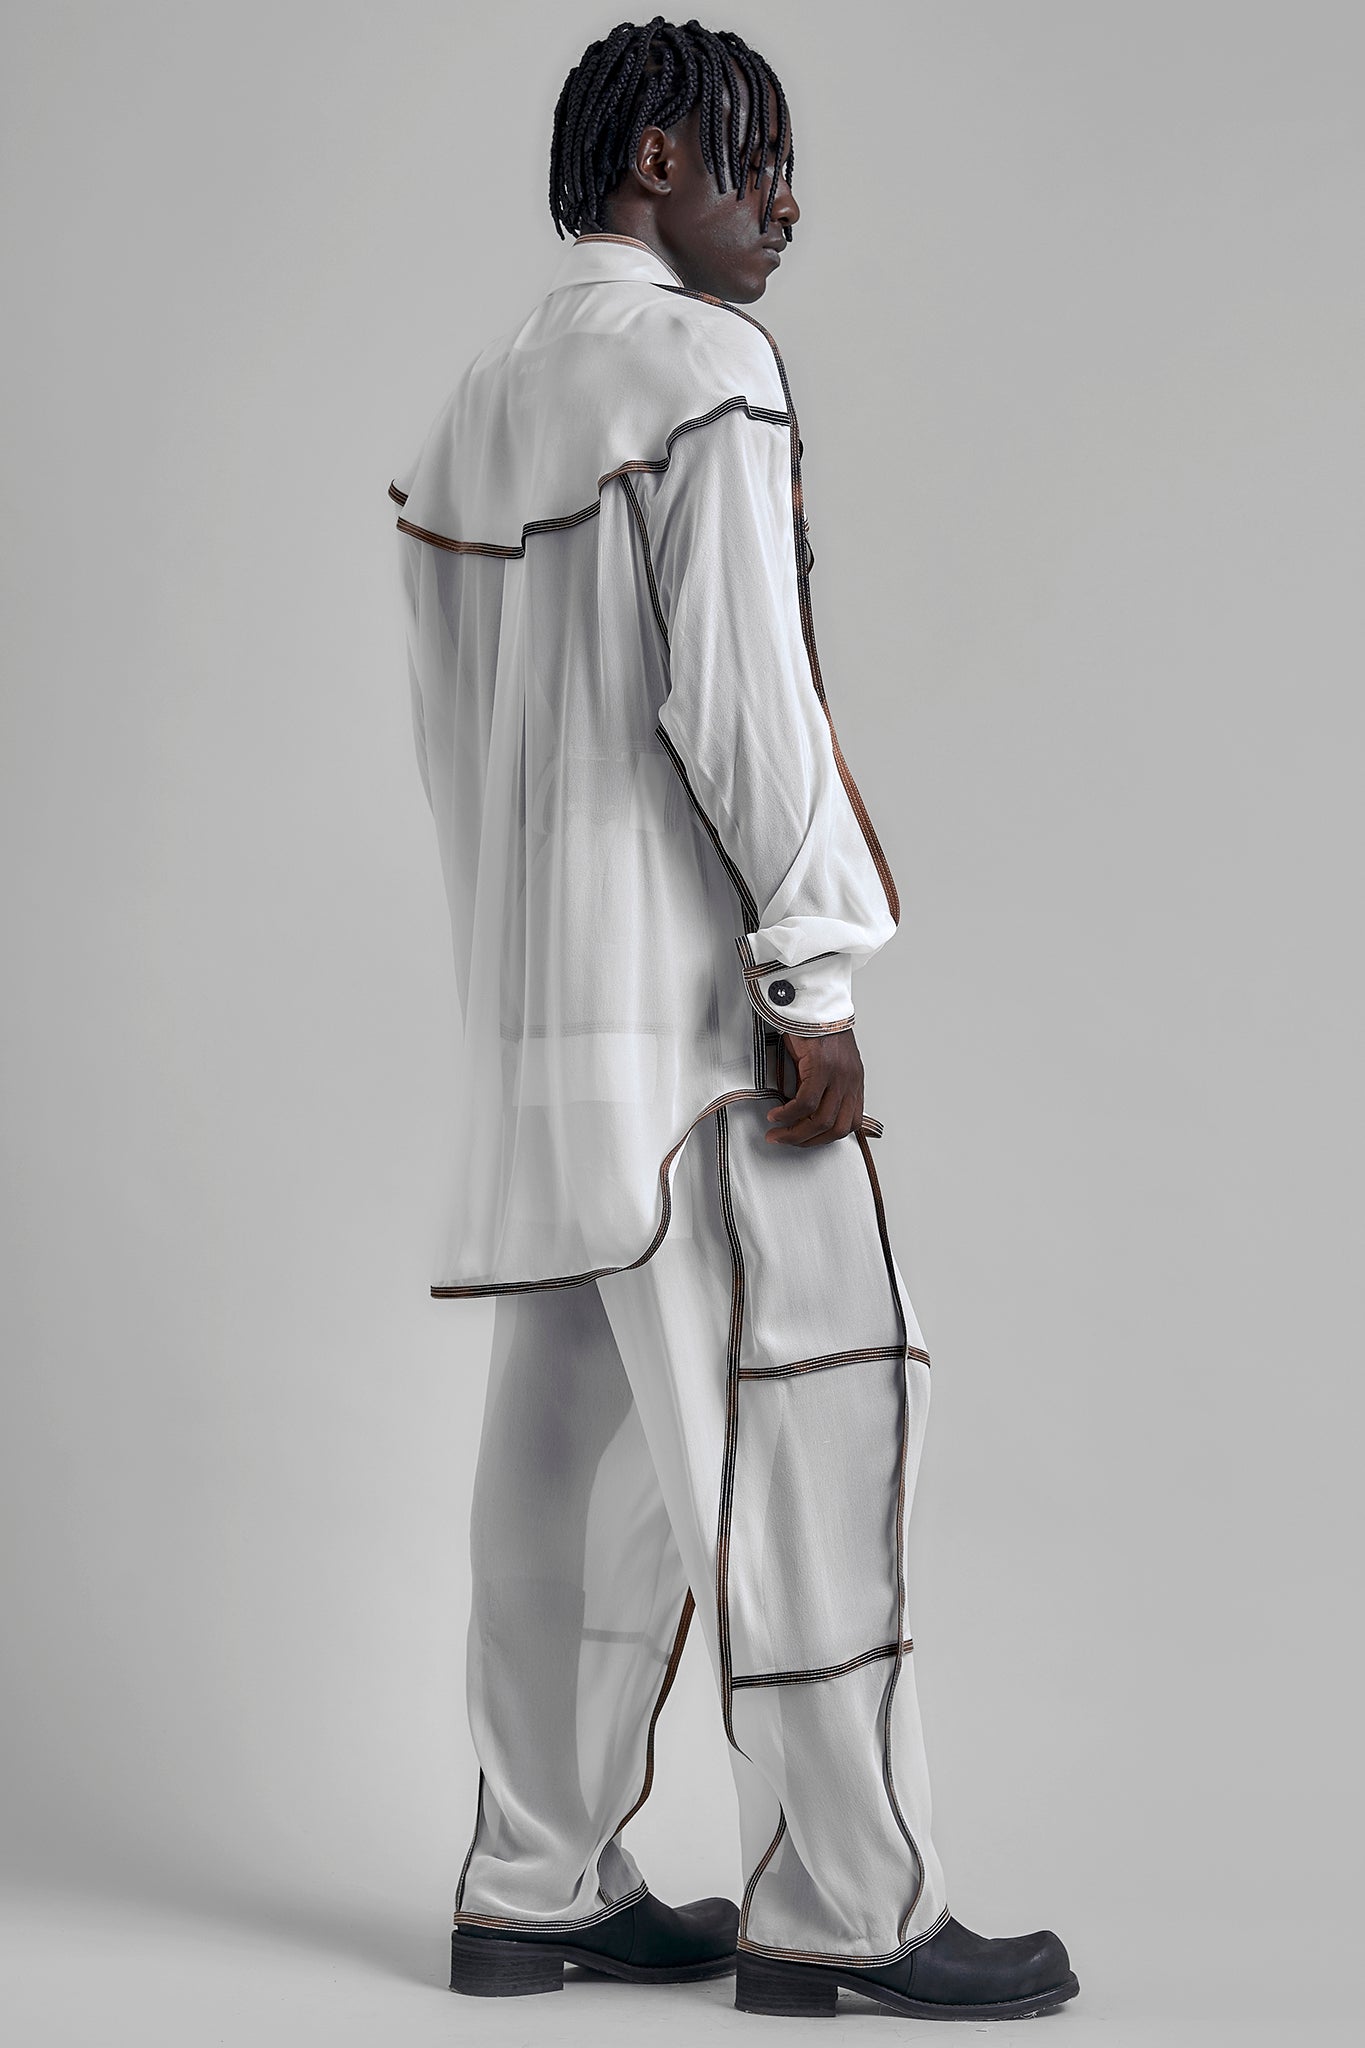 Silk Front Multiple Pieces Shirt - White